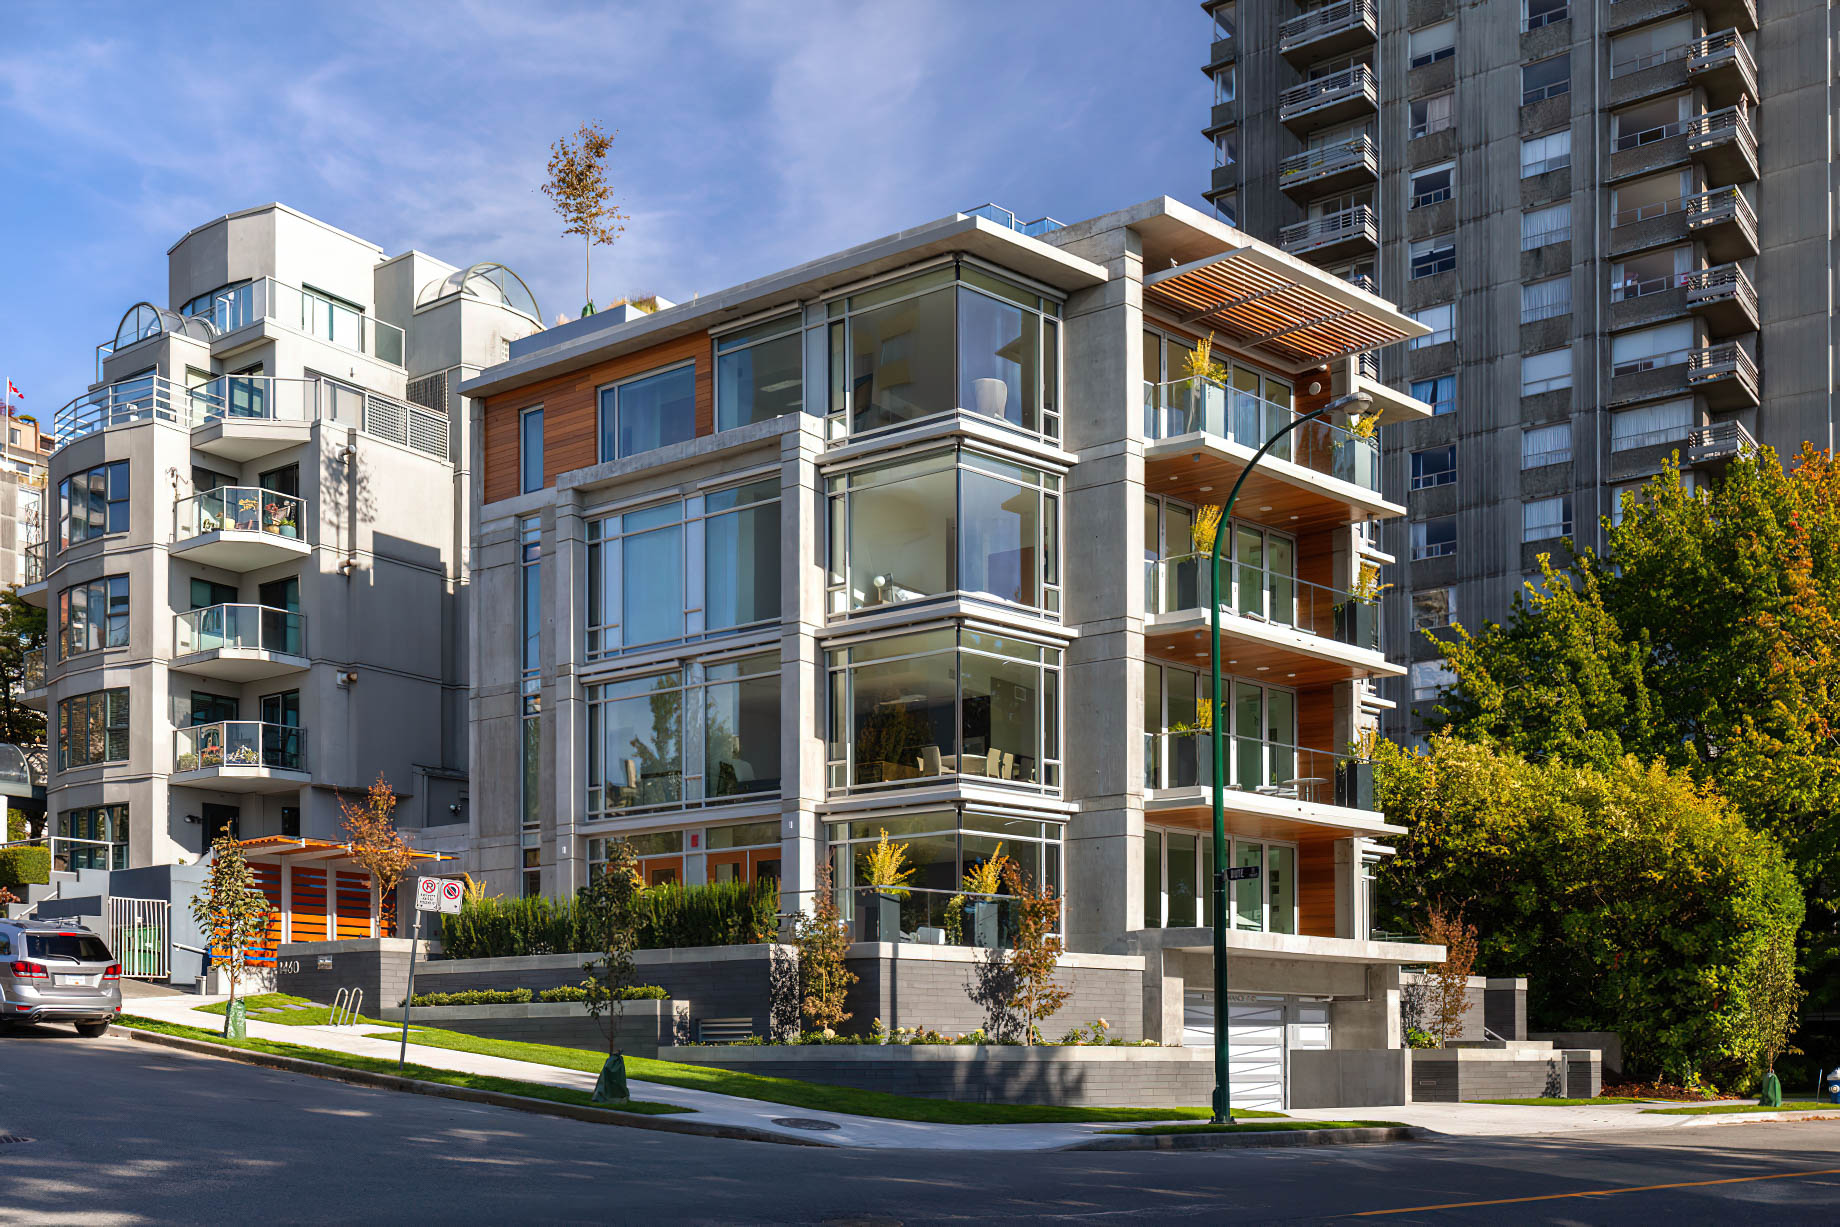 Eventide Ultra Luxury English Bay Homes – Bute St, Vancouver, BC, Canada